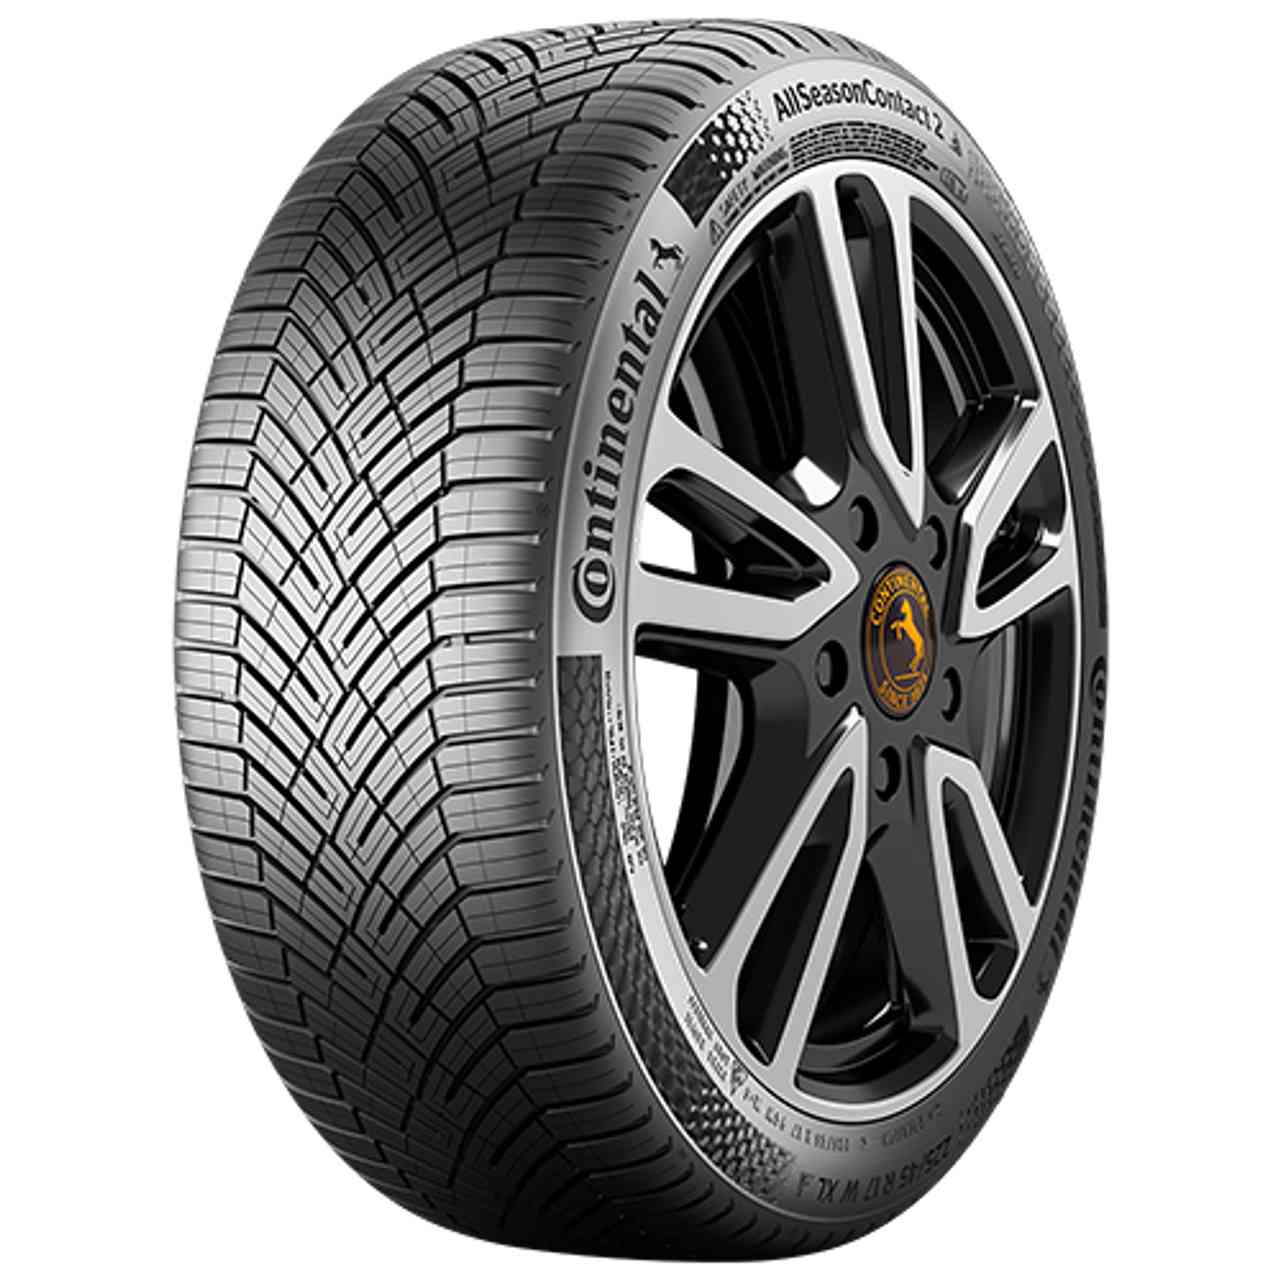 CONTINENTAL ALLSEASONCONTACT 2 (EVc) 235/60R18 103T BSW